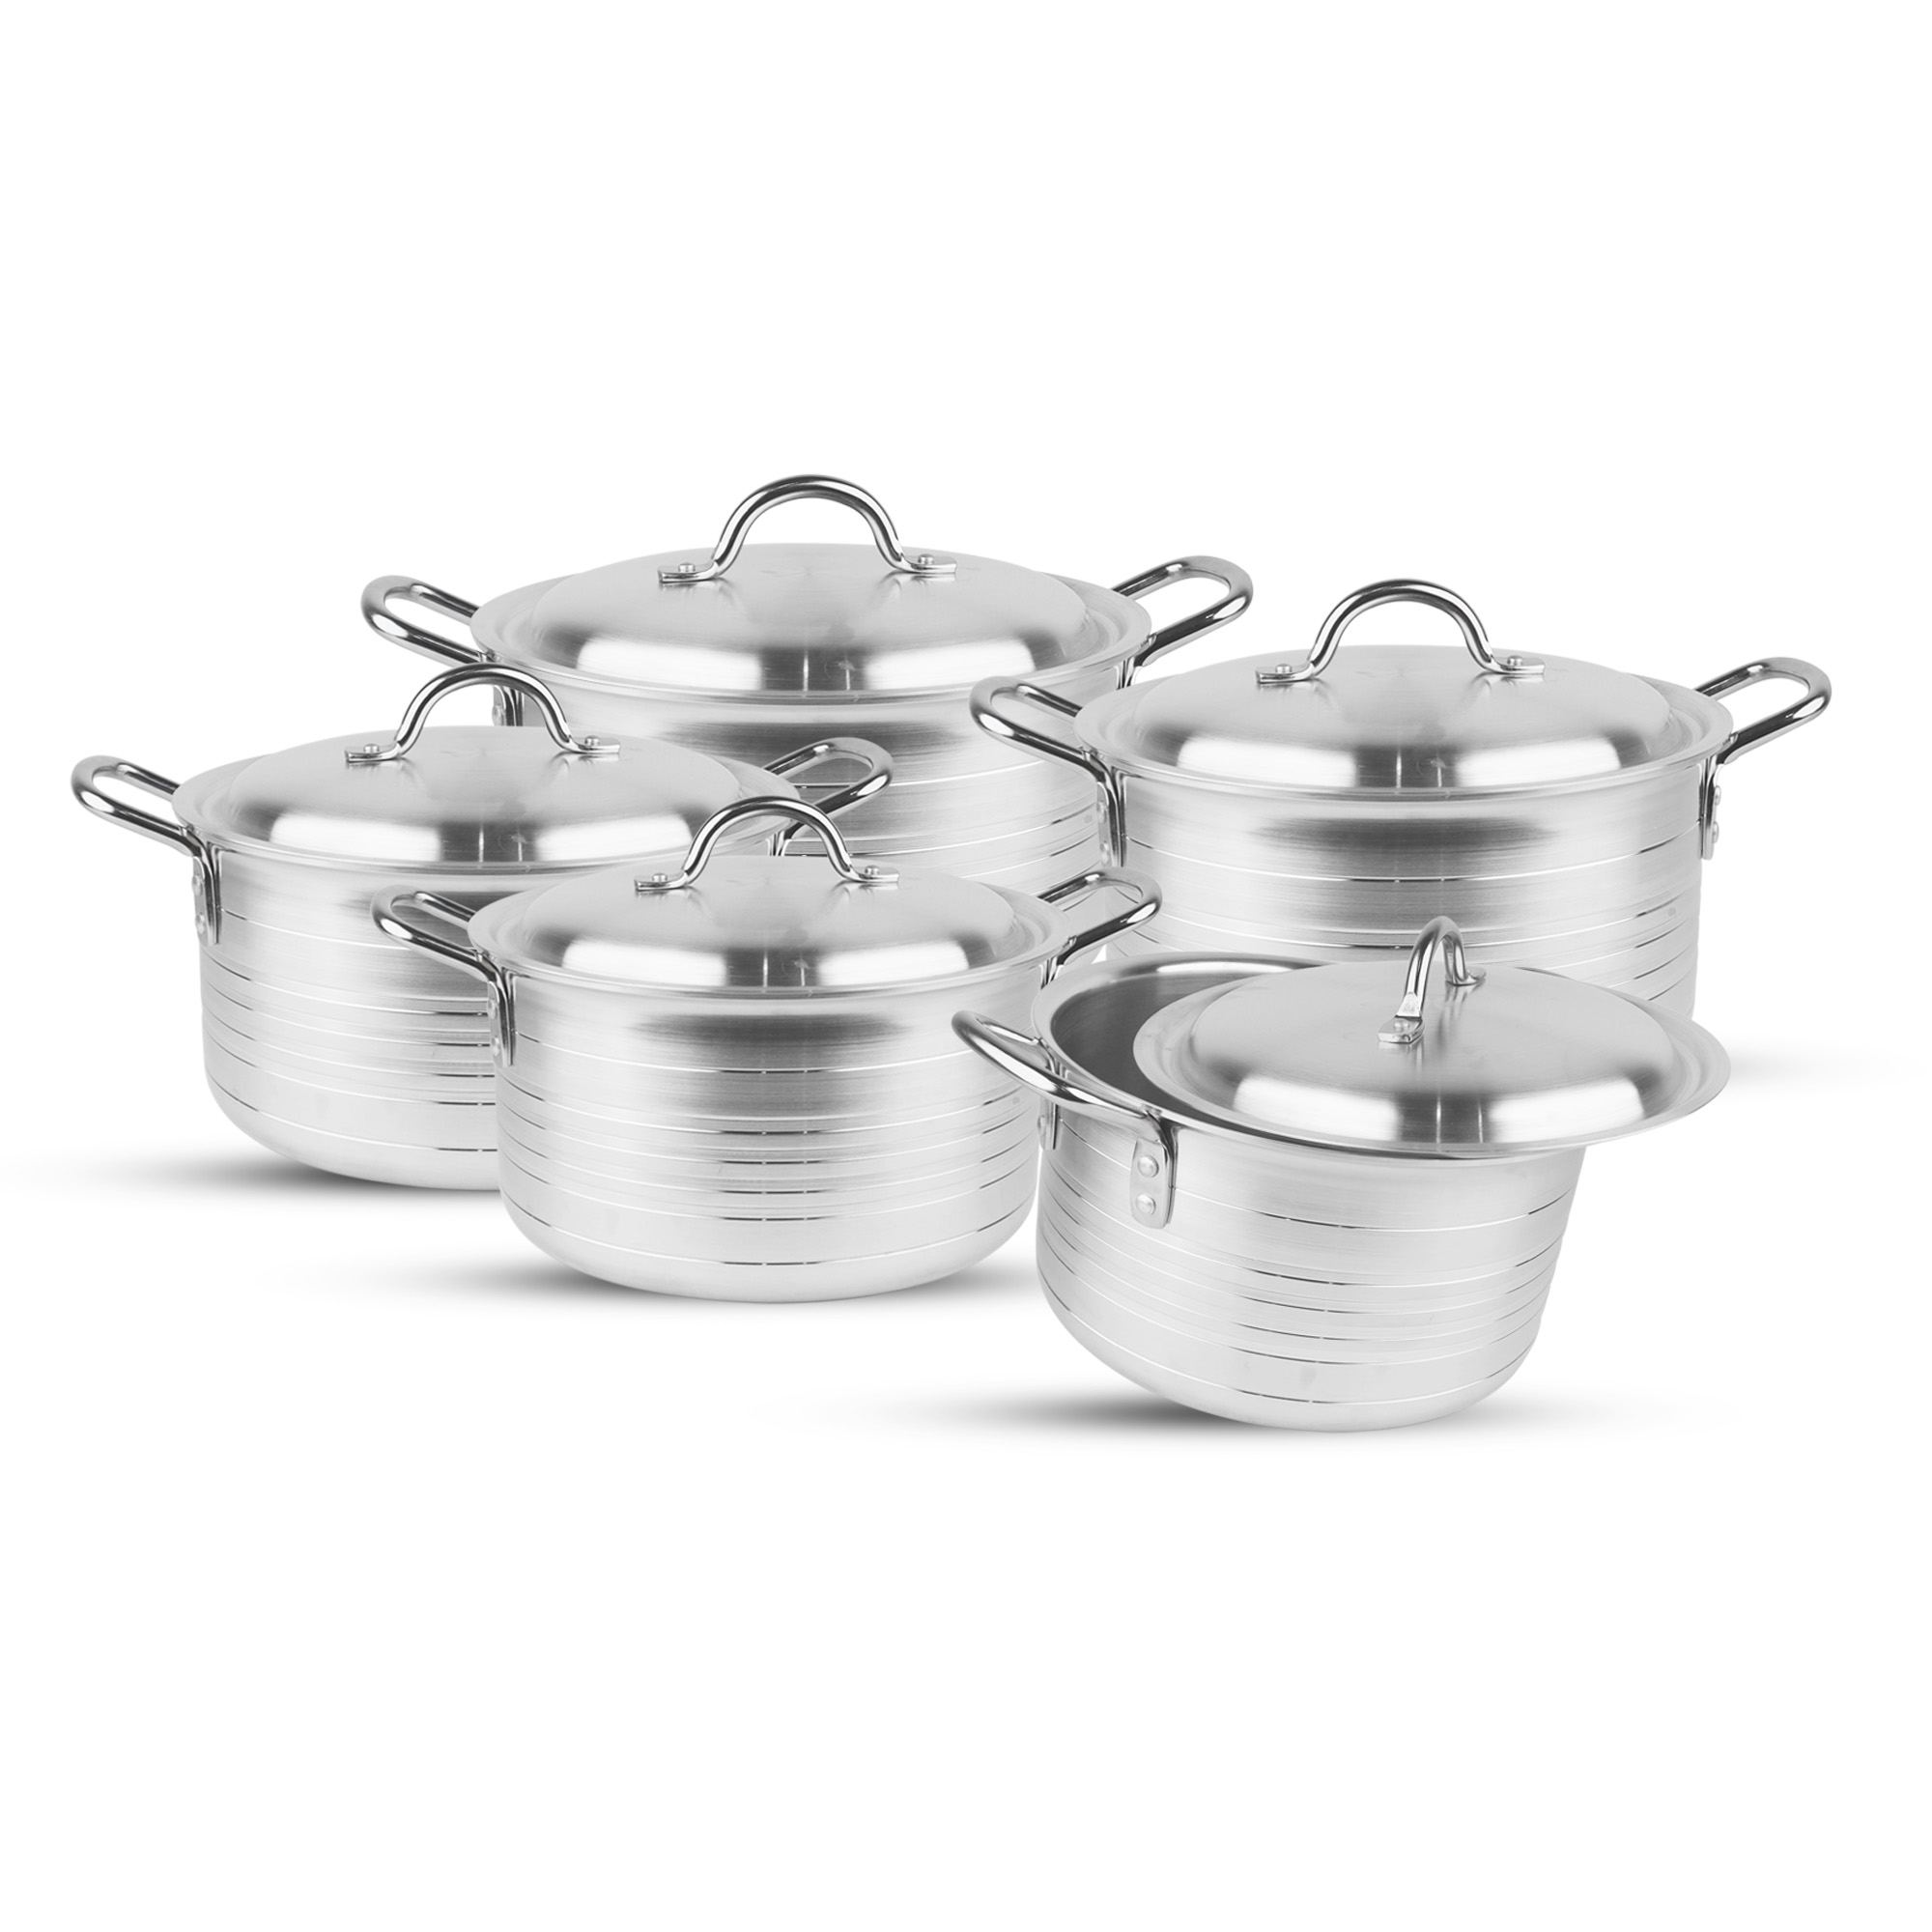 majestic chef best quality aluminum cookware cooking pots cooking pans heavy guage new look groovy set at best price in pakistan